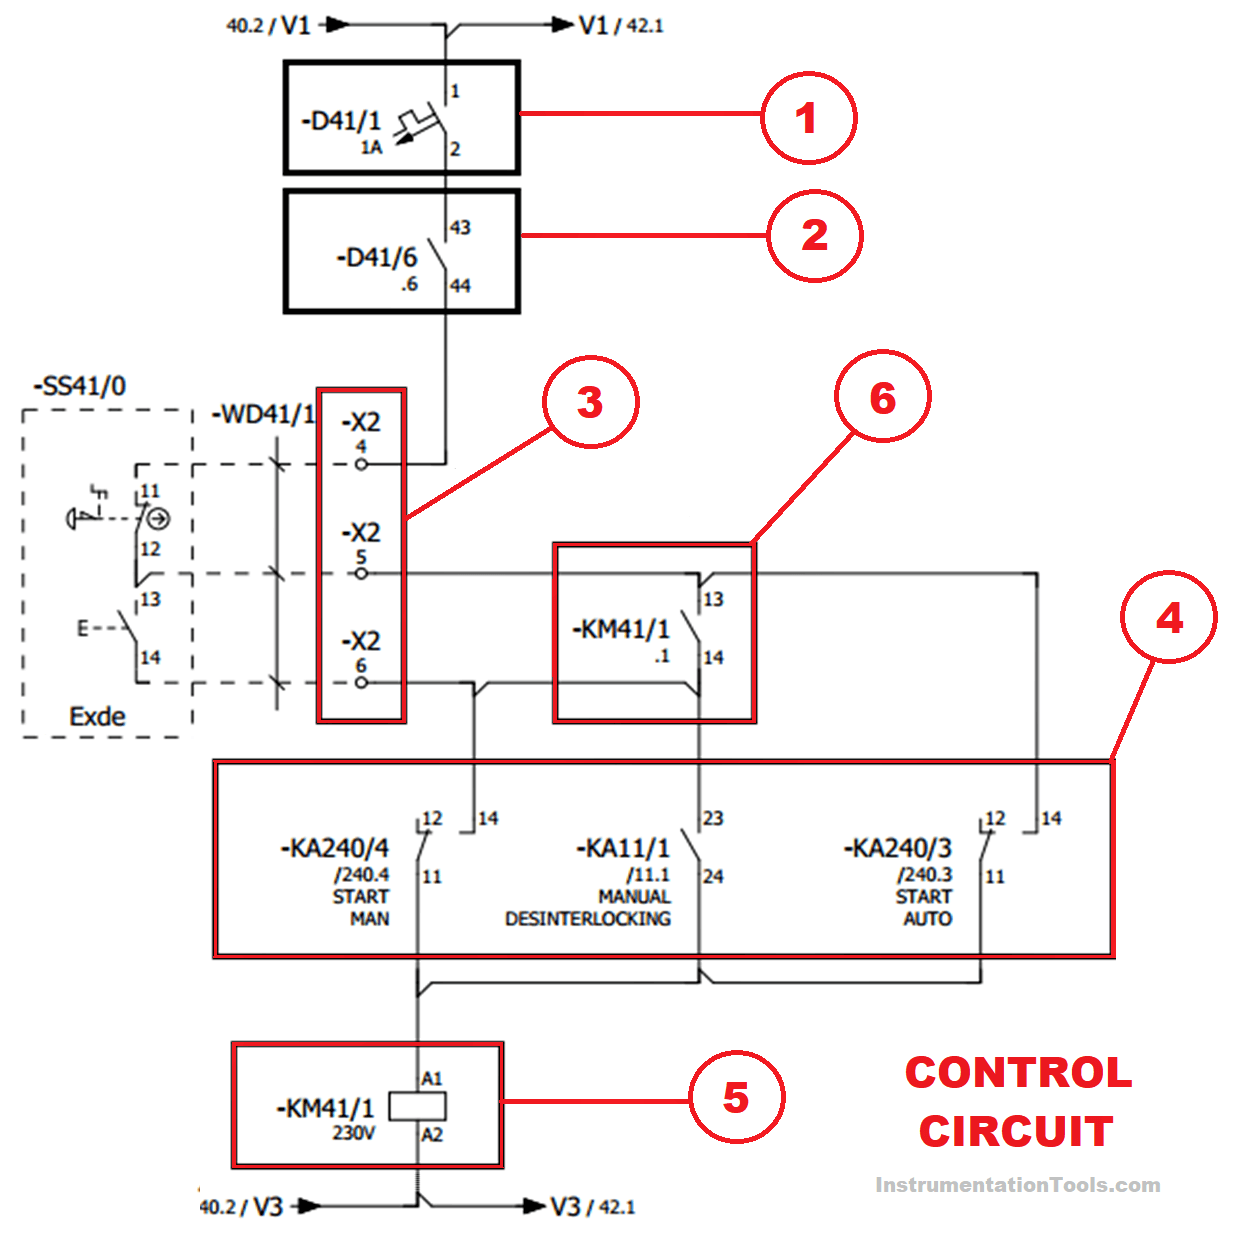 Control circuit for the motor using PLC